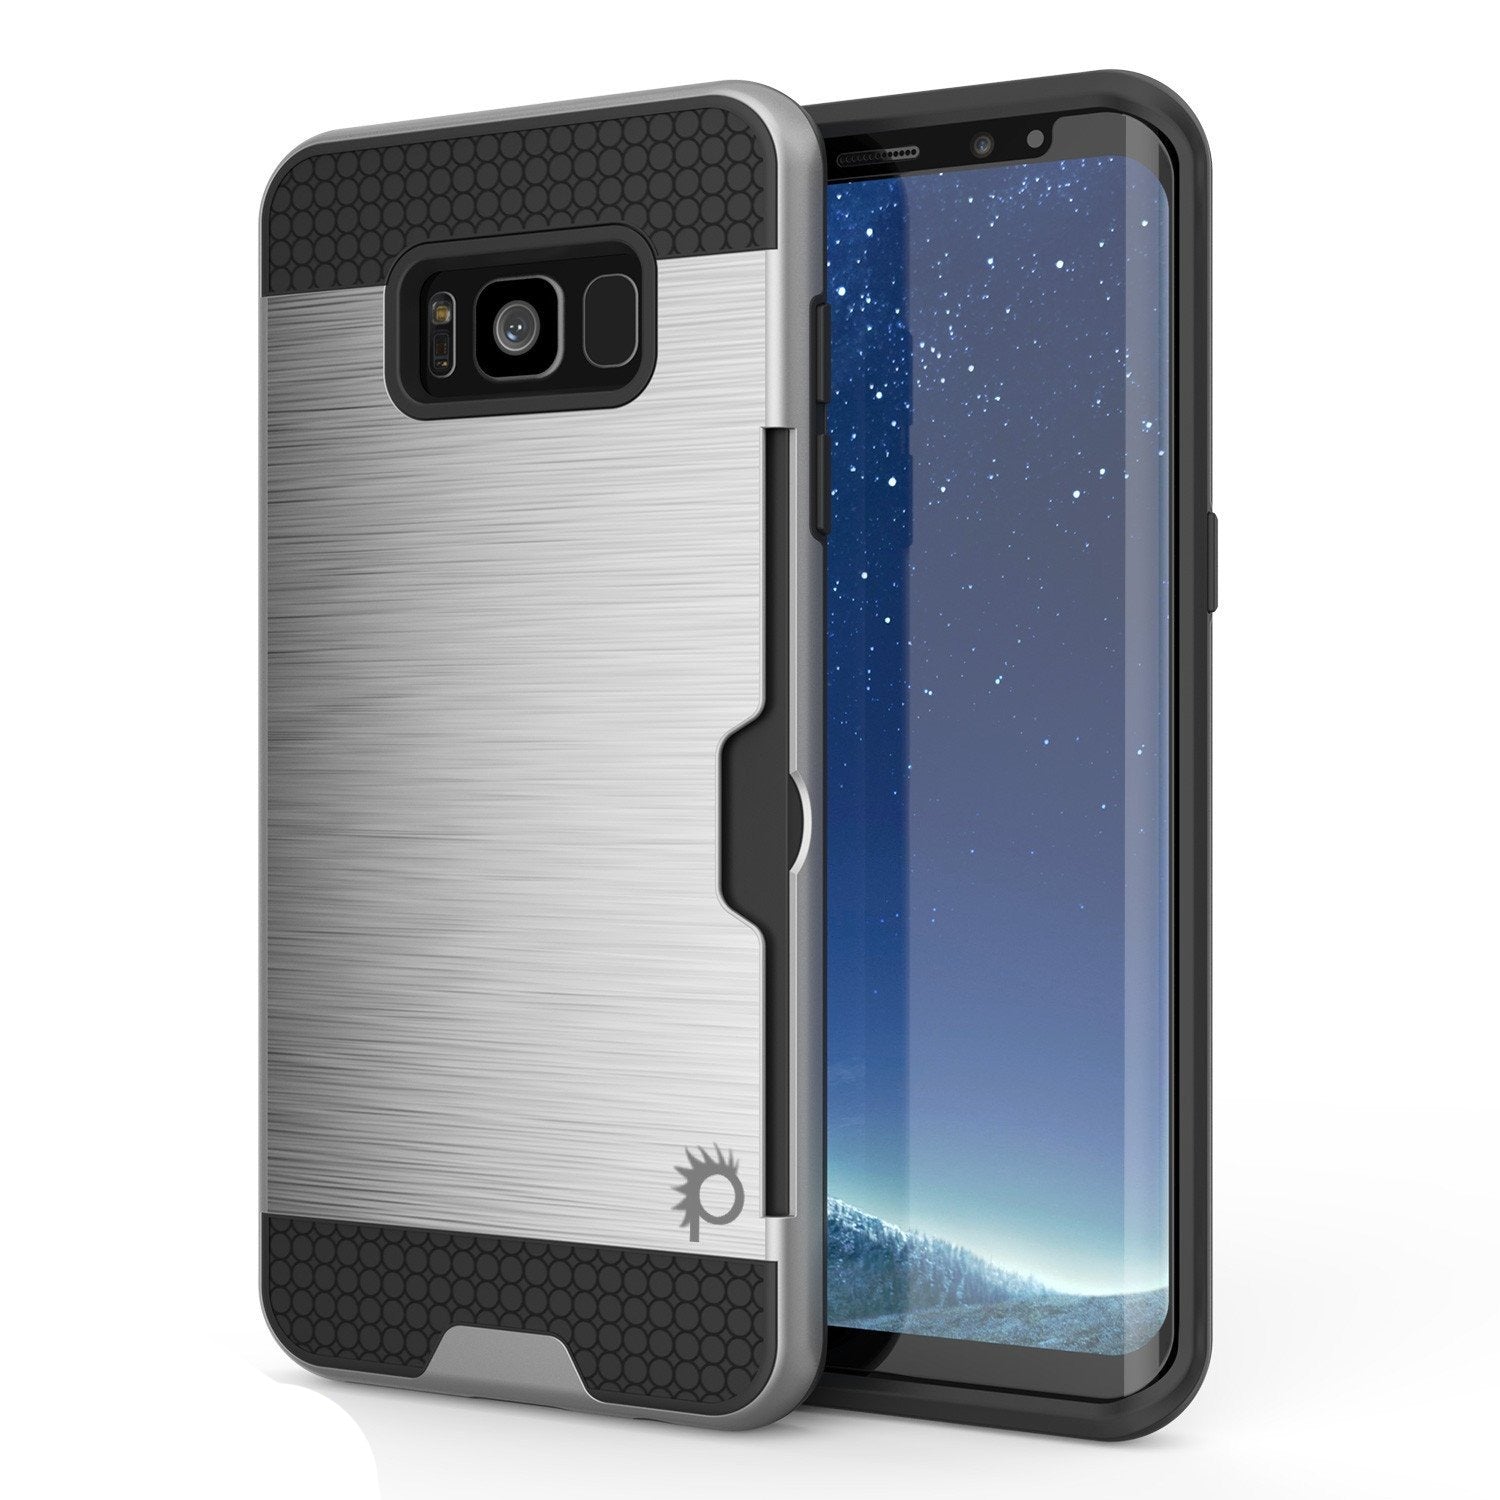 Galaxy S8 Case, PUNKcase [SLOT Series] [Slim Fit] Dual-Layer Armor Cover w/Integrated Anti-Shock System, Credit Card Slot & PUNKSHIELD Screen Protector for Samsung Galaxy S8 [Silver]